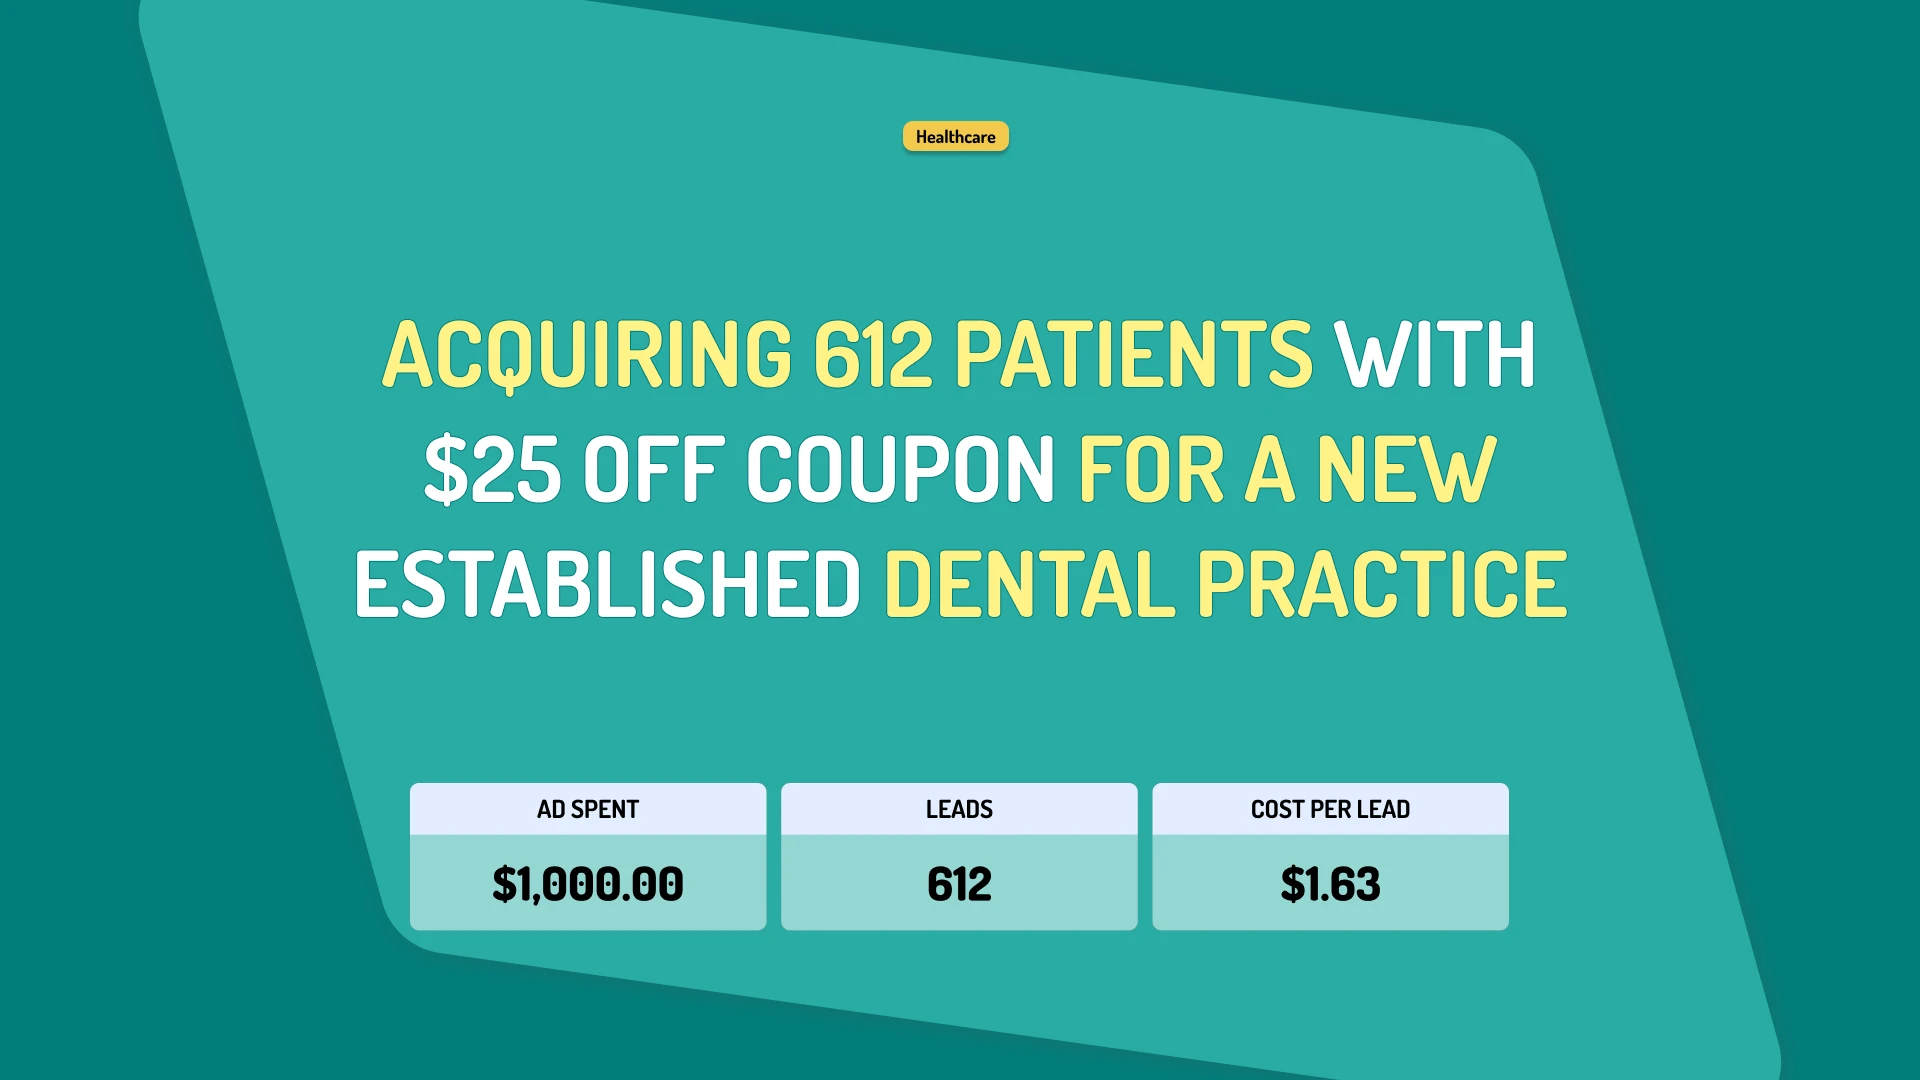 New Dental Practice: acquiring 612 patients with a $25 OFF coupon